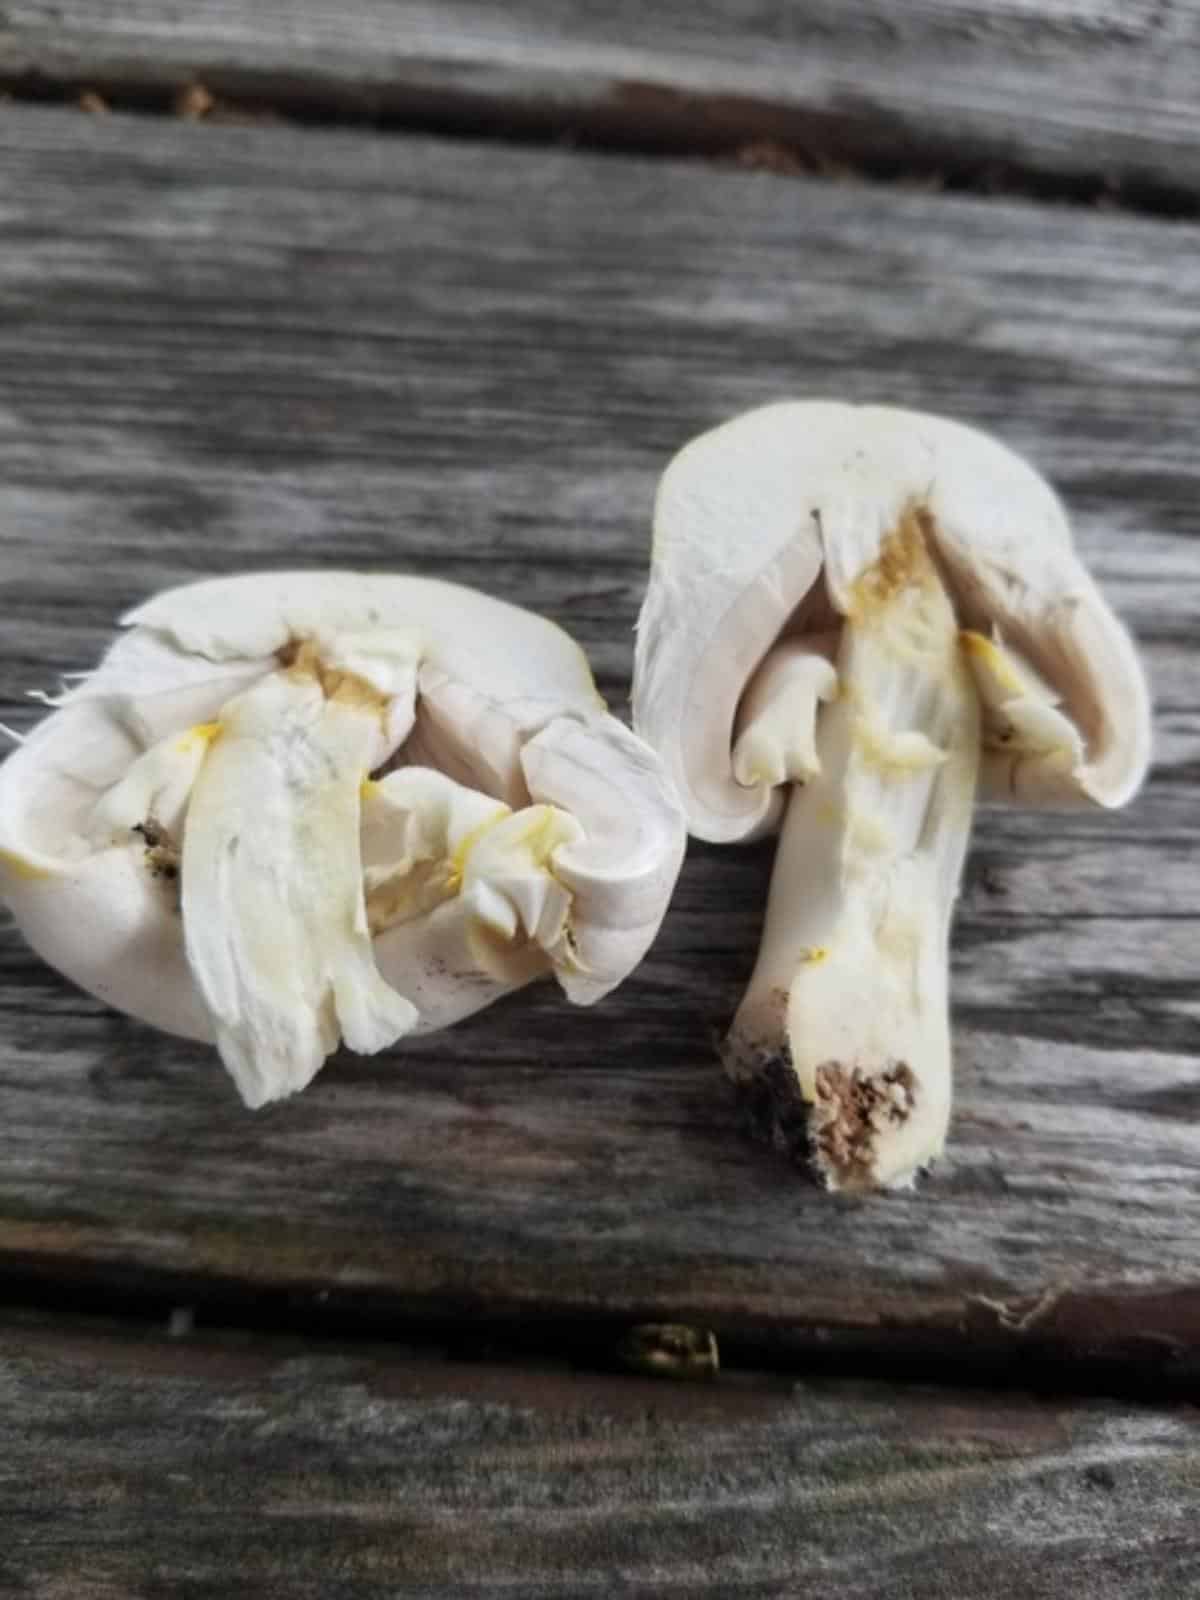 yellow stainer agaricus